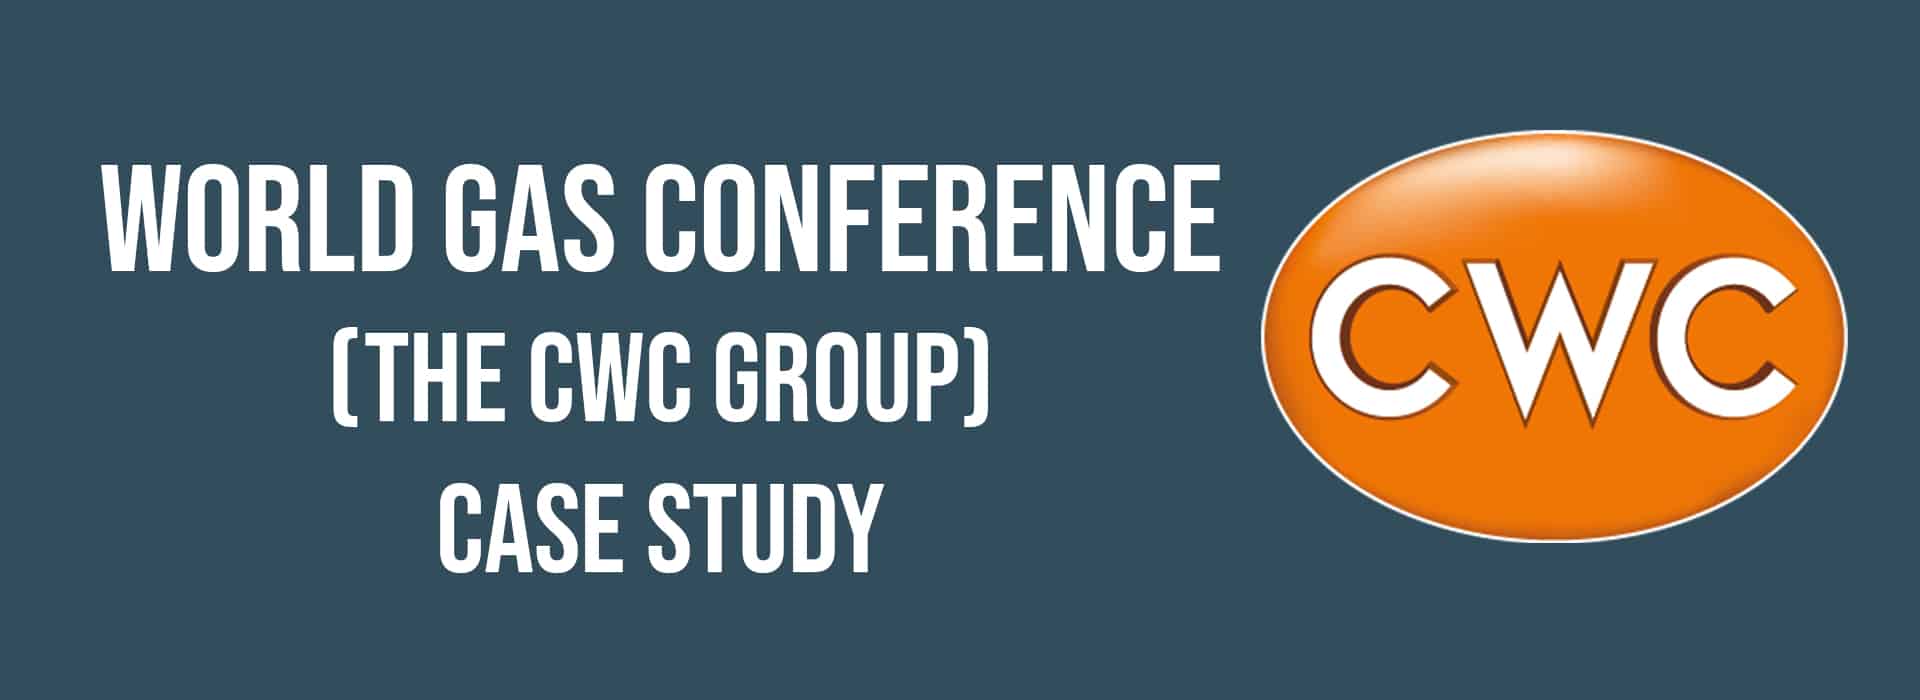 World Gas Conference CWC Group Case Study